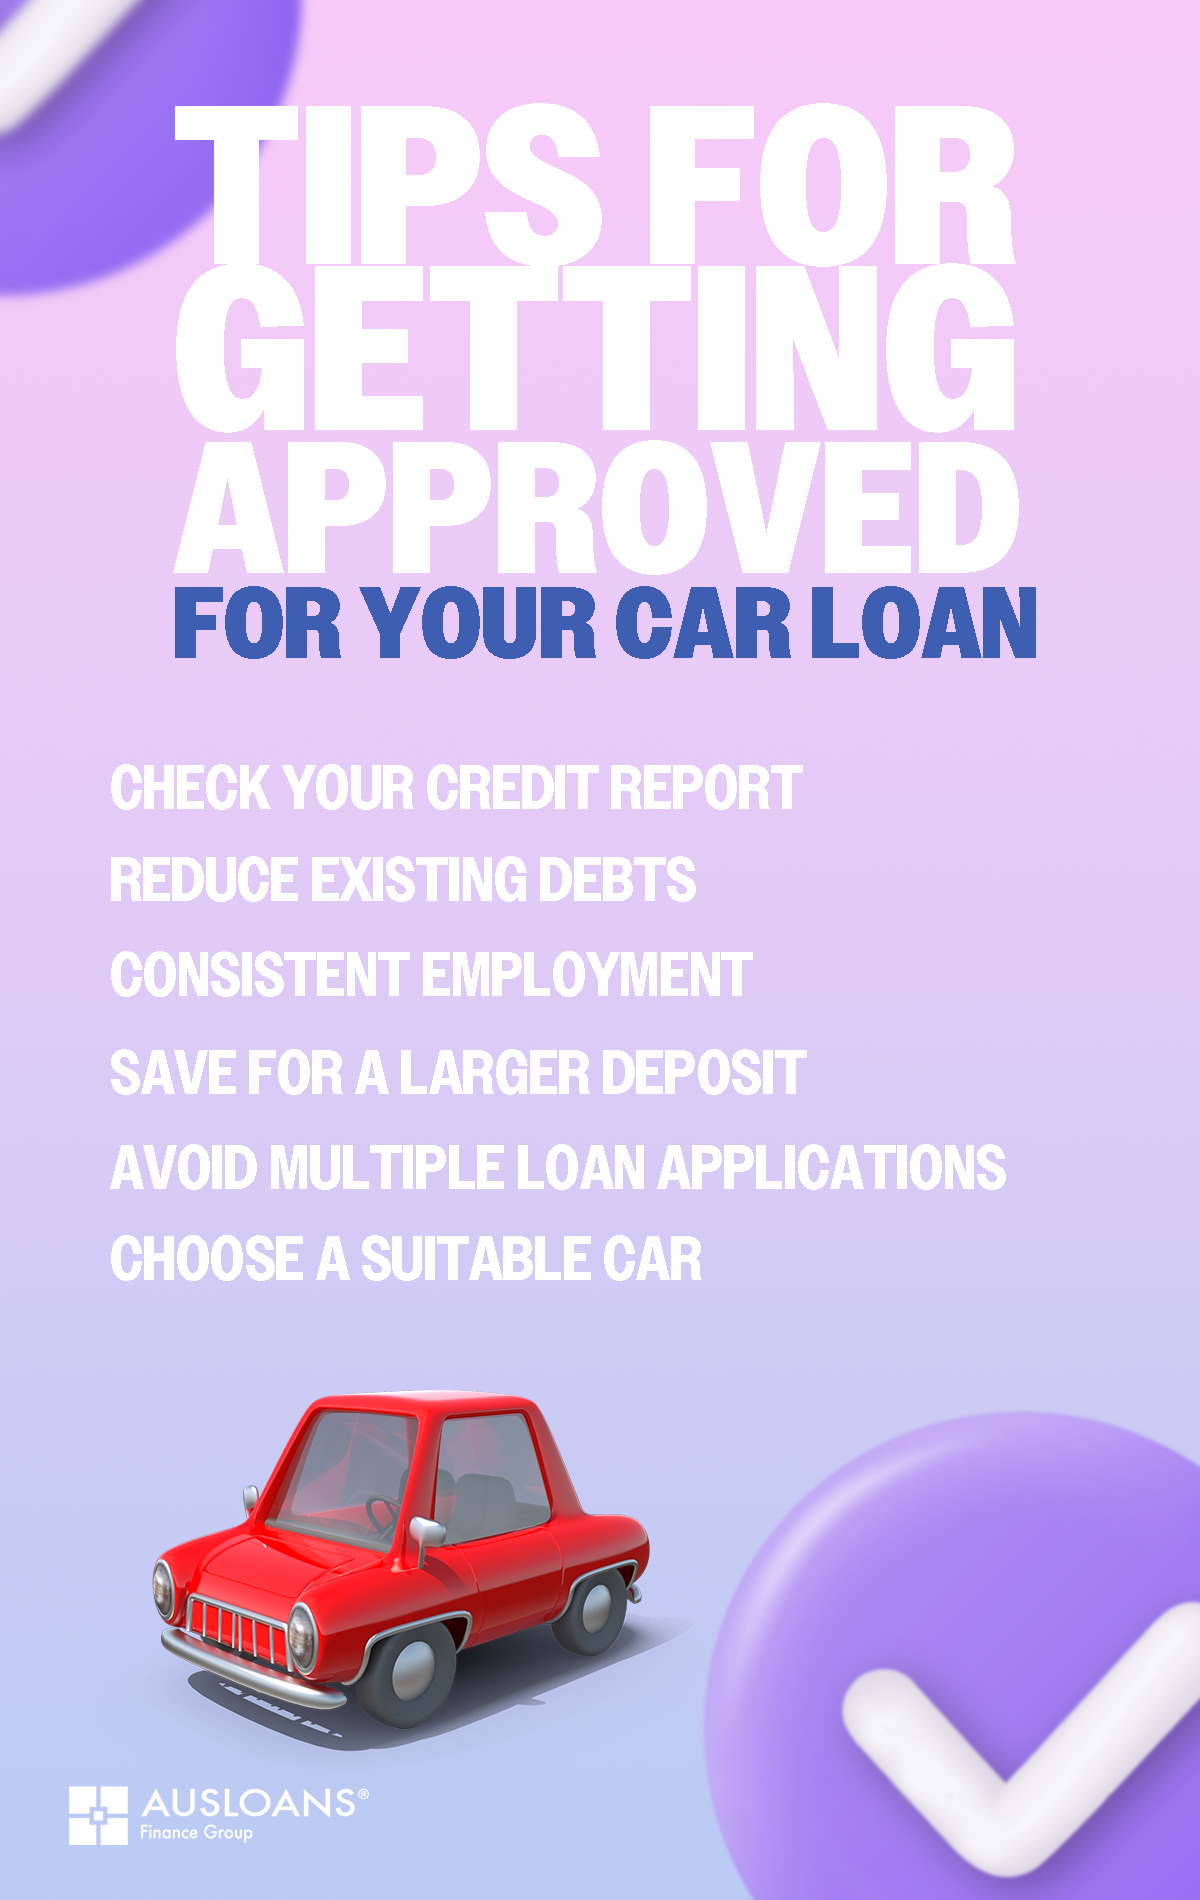 TIPS-FOR-GETTING-APPROVED-FOR-YOUR-CAR-LOAN